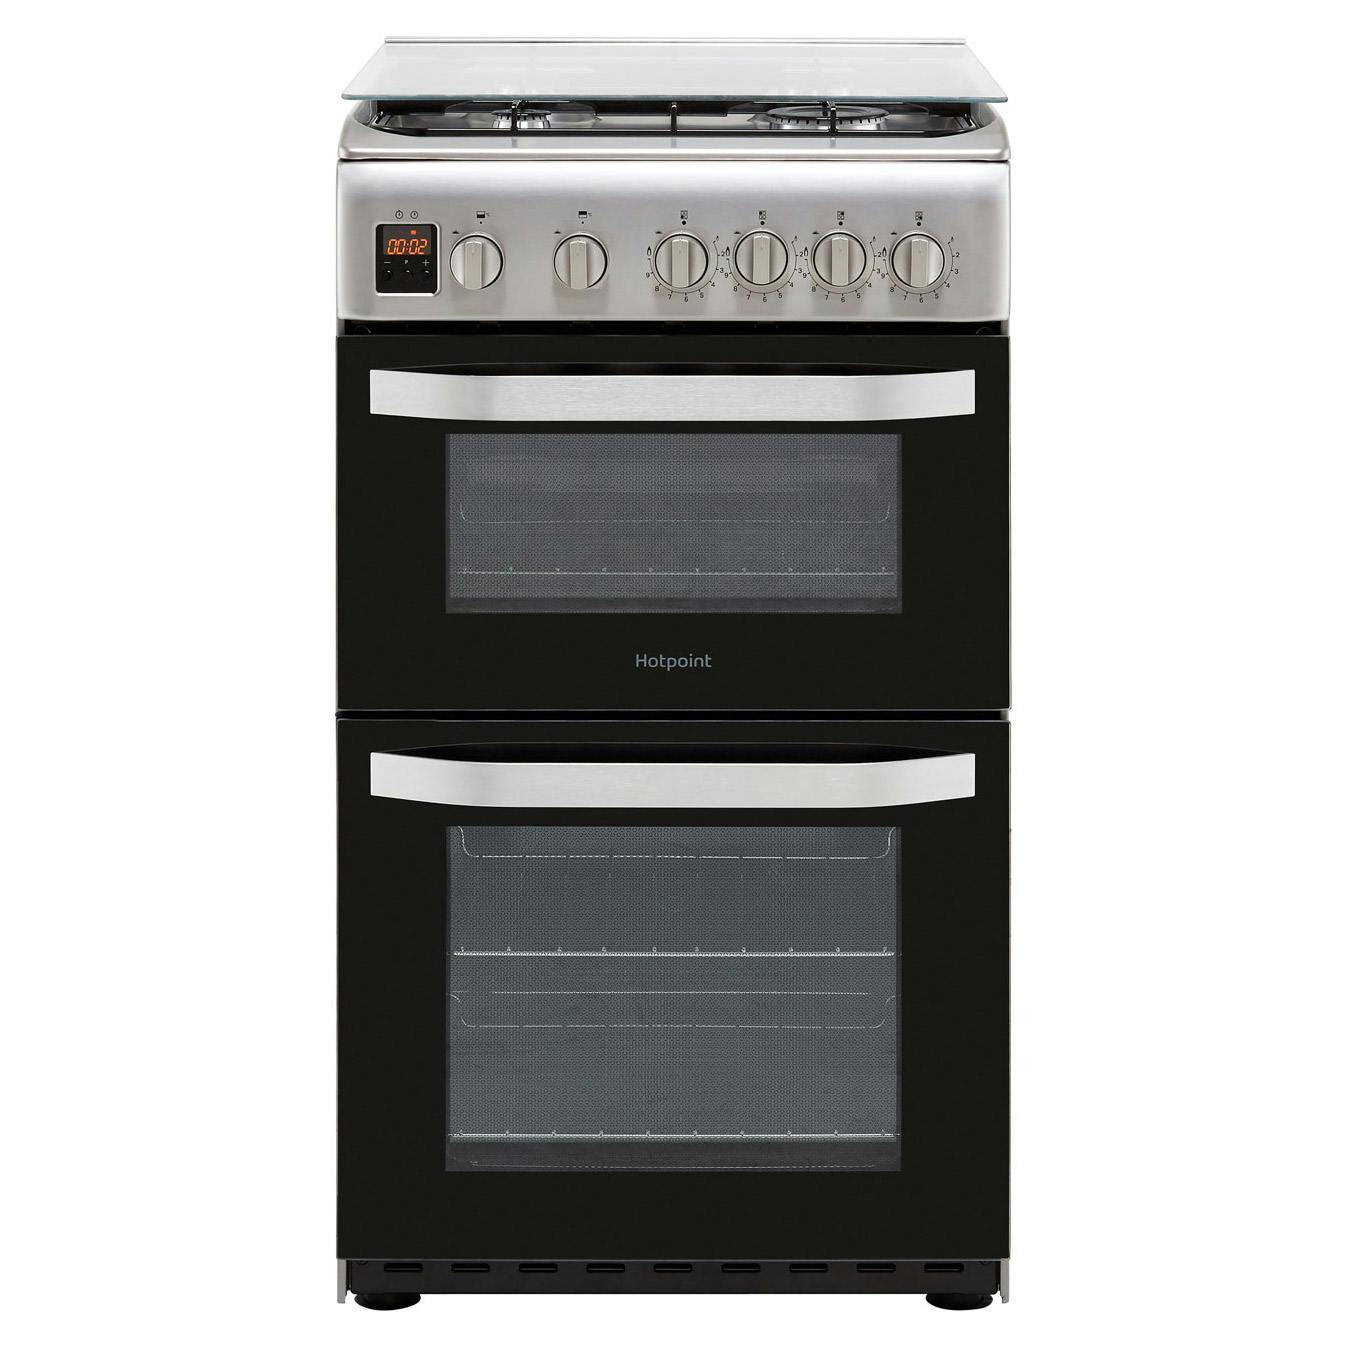 50cm Gas Cooker in St/St, Double Oven 